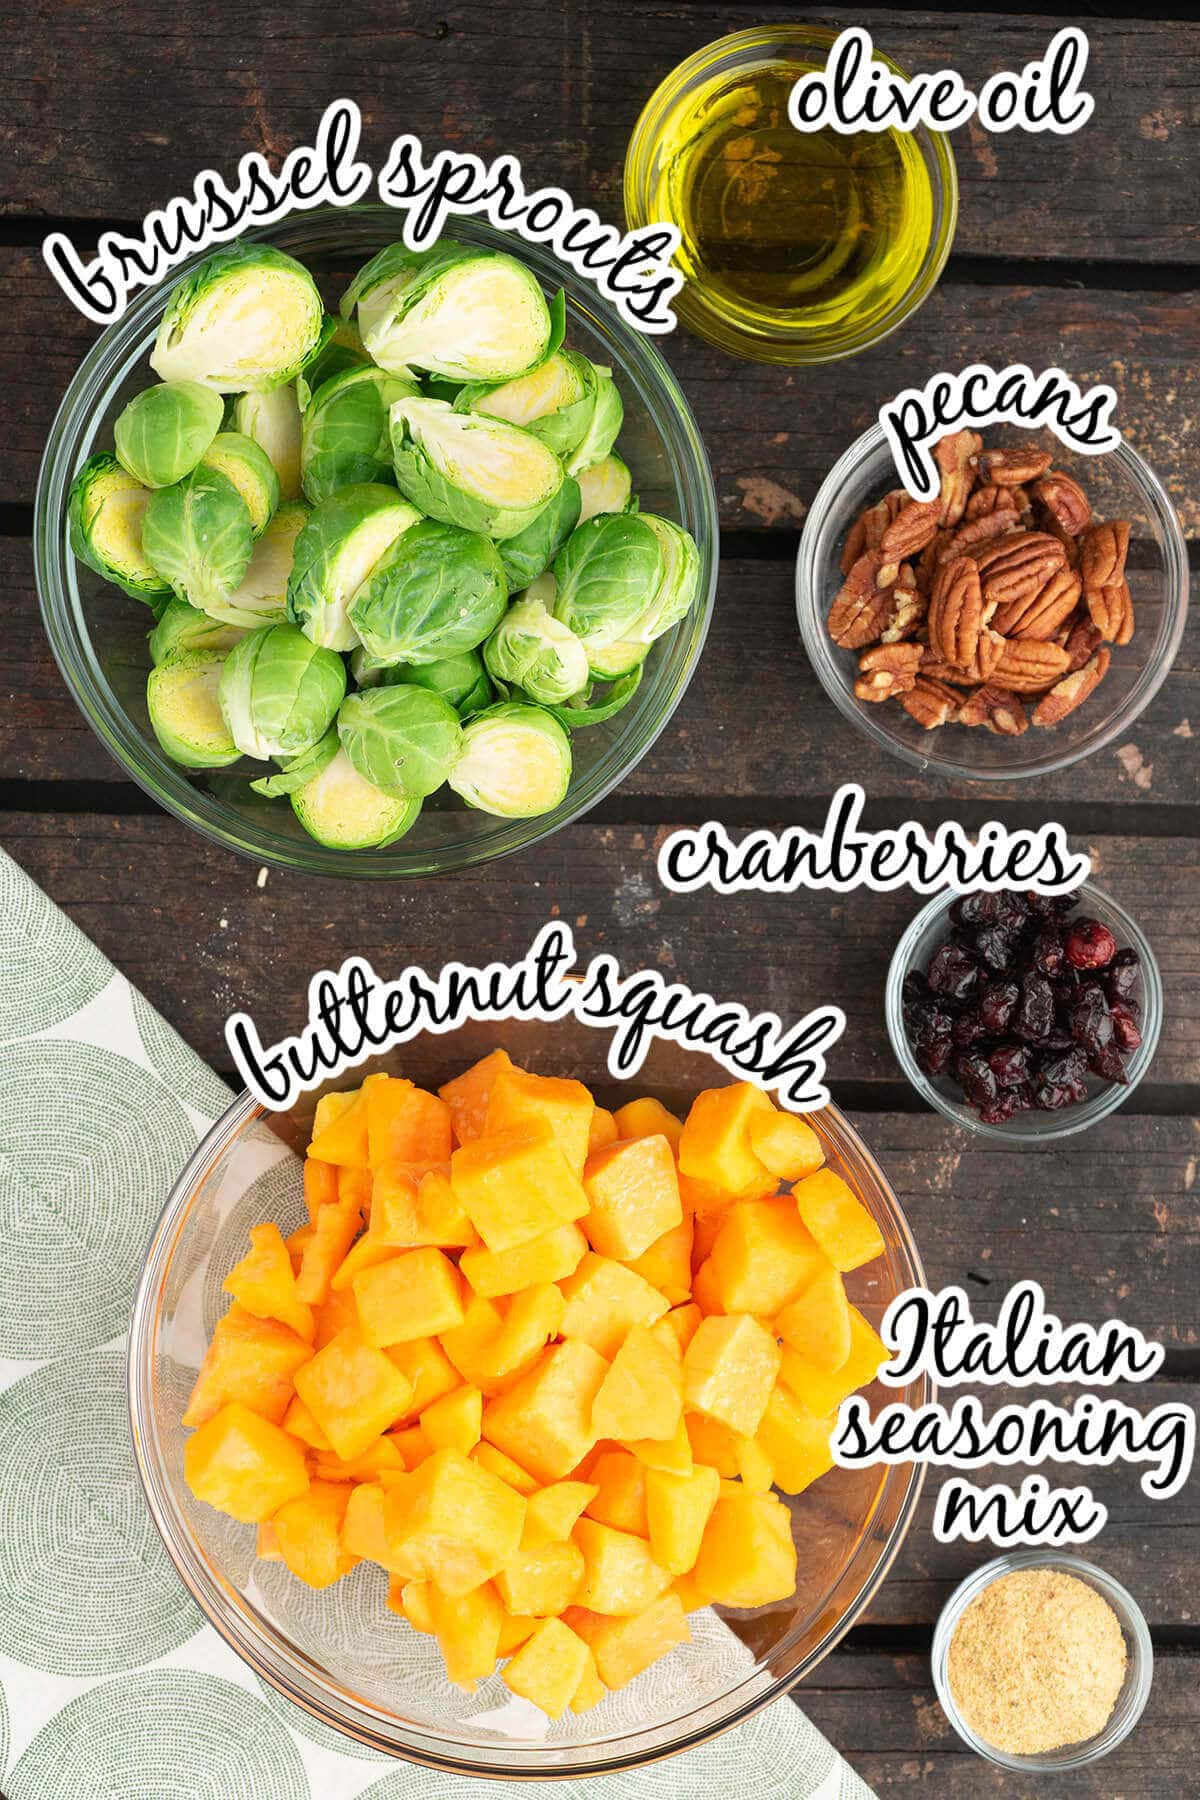 Ingredients for vegetable side dish with print overlay.